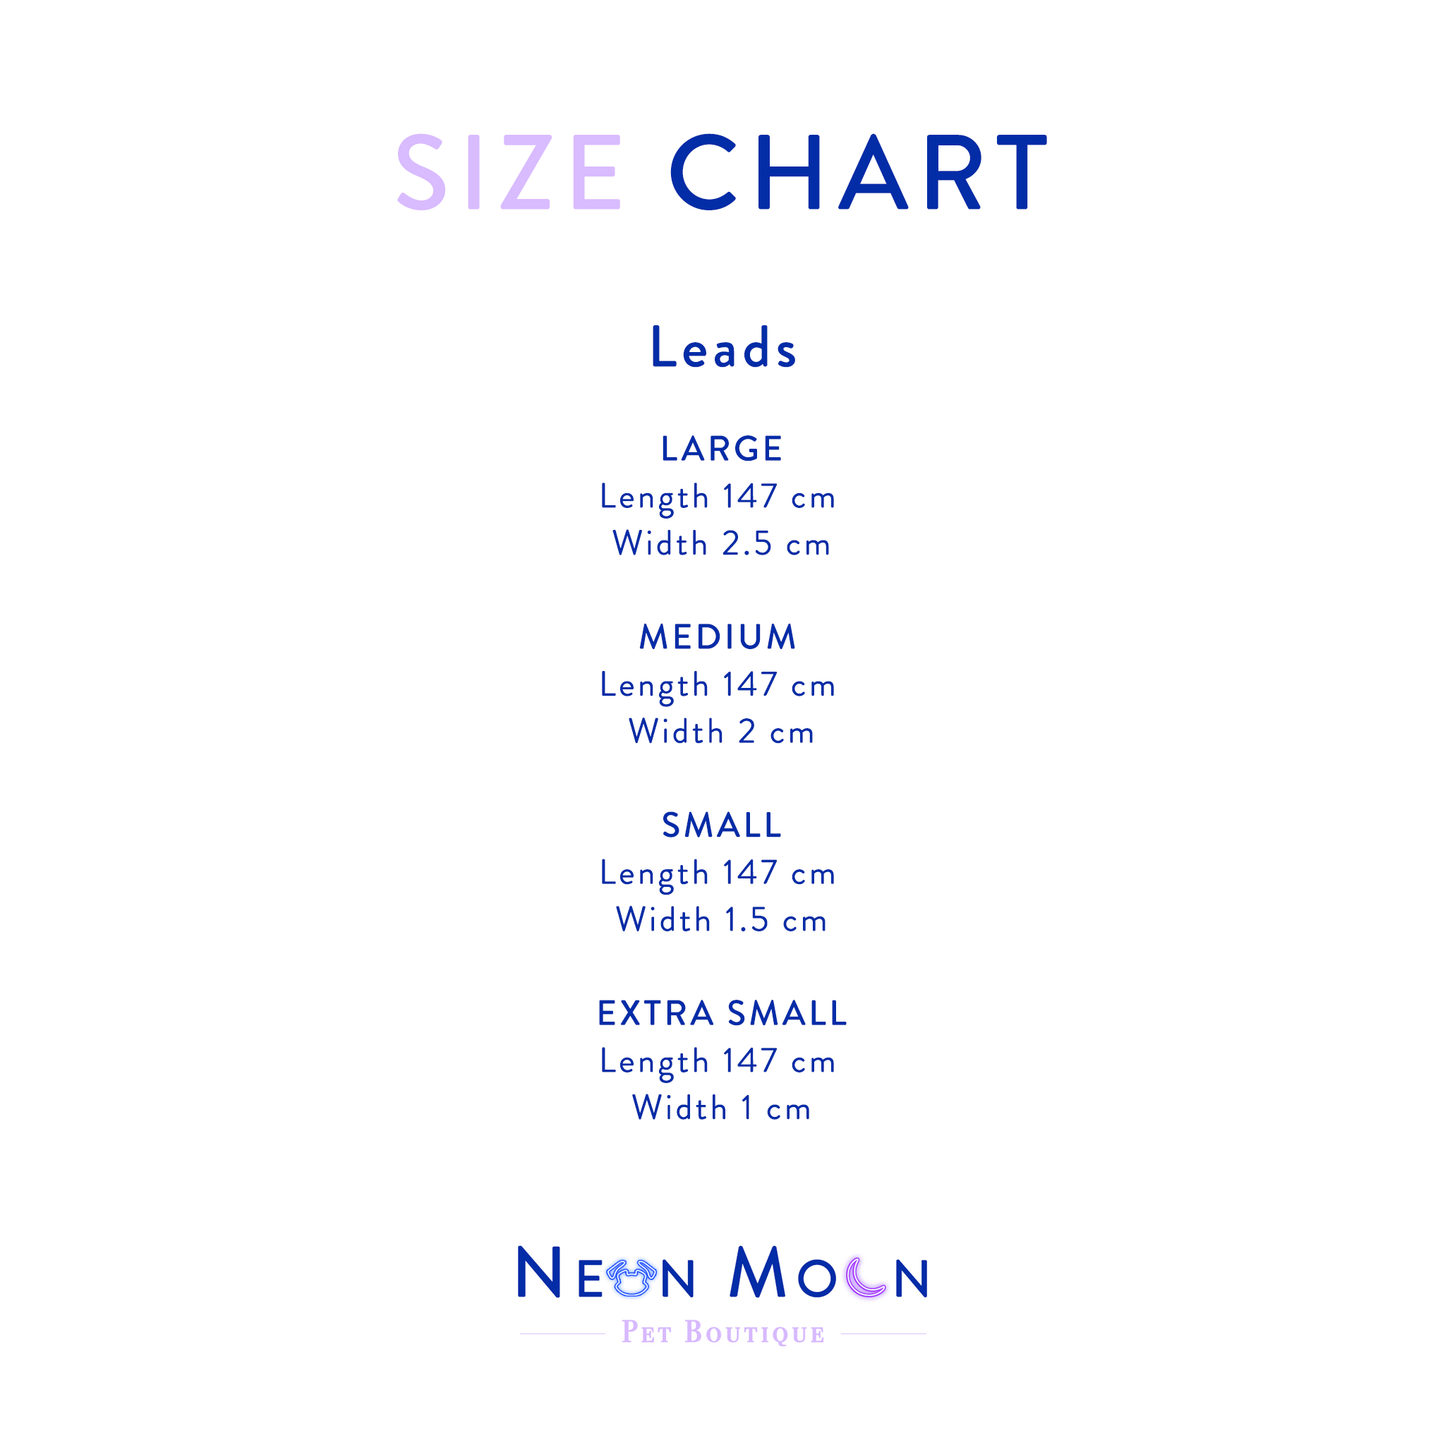 Neon Moon Leads Size Chart